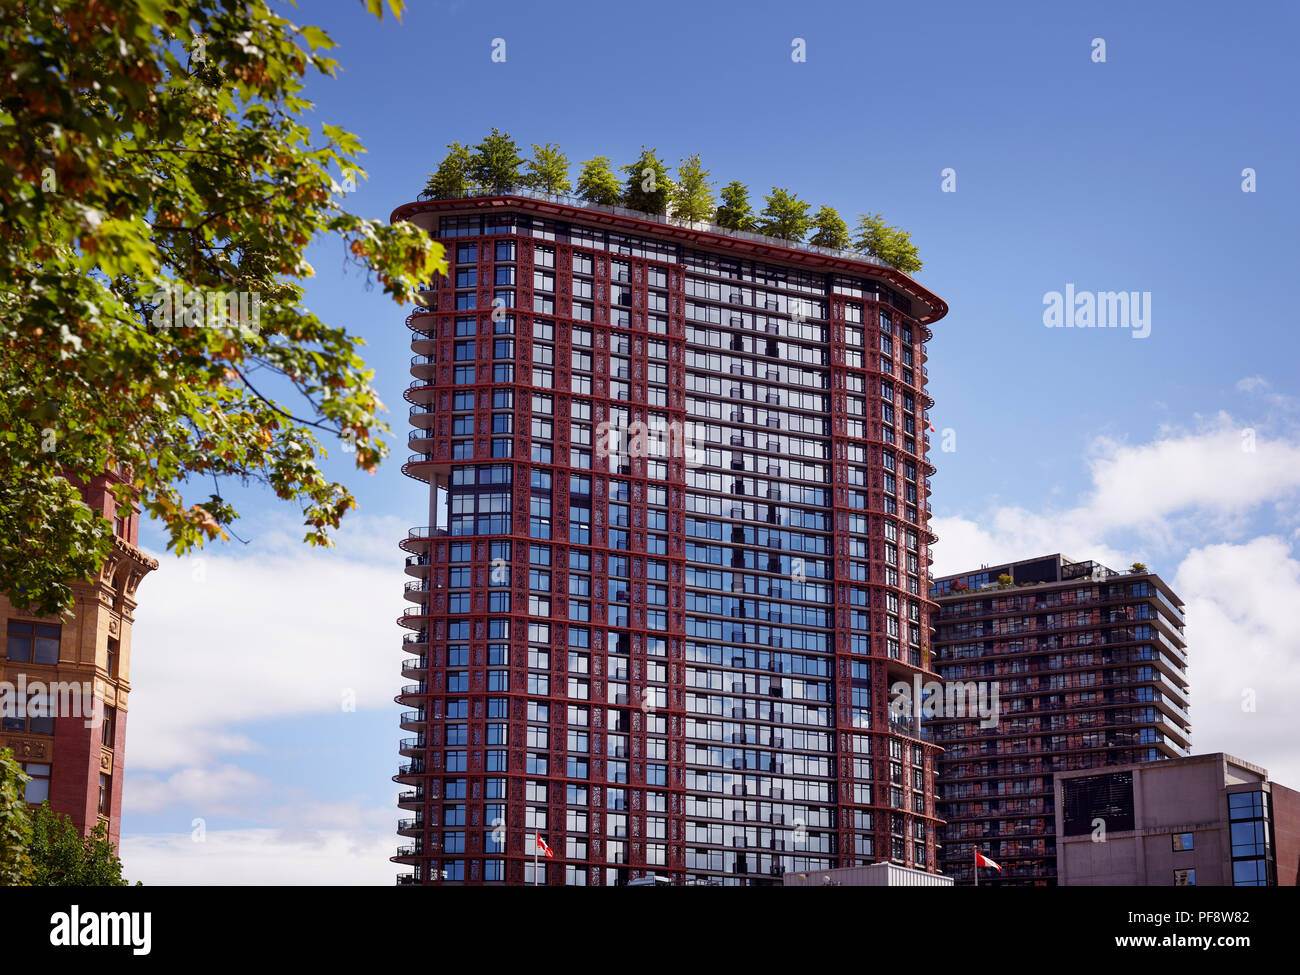 The Woodward's Building with trees on top of the roof, a landmark in the Downtown Eastside of Vancouver, British Columbia, Canada. Stock Photo